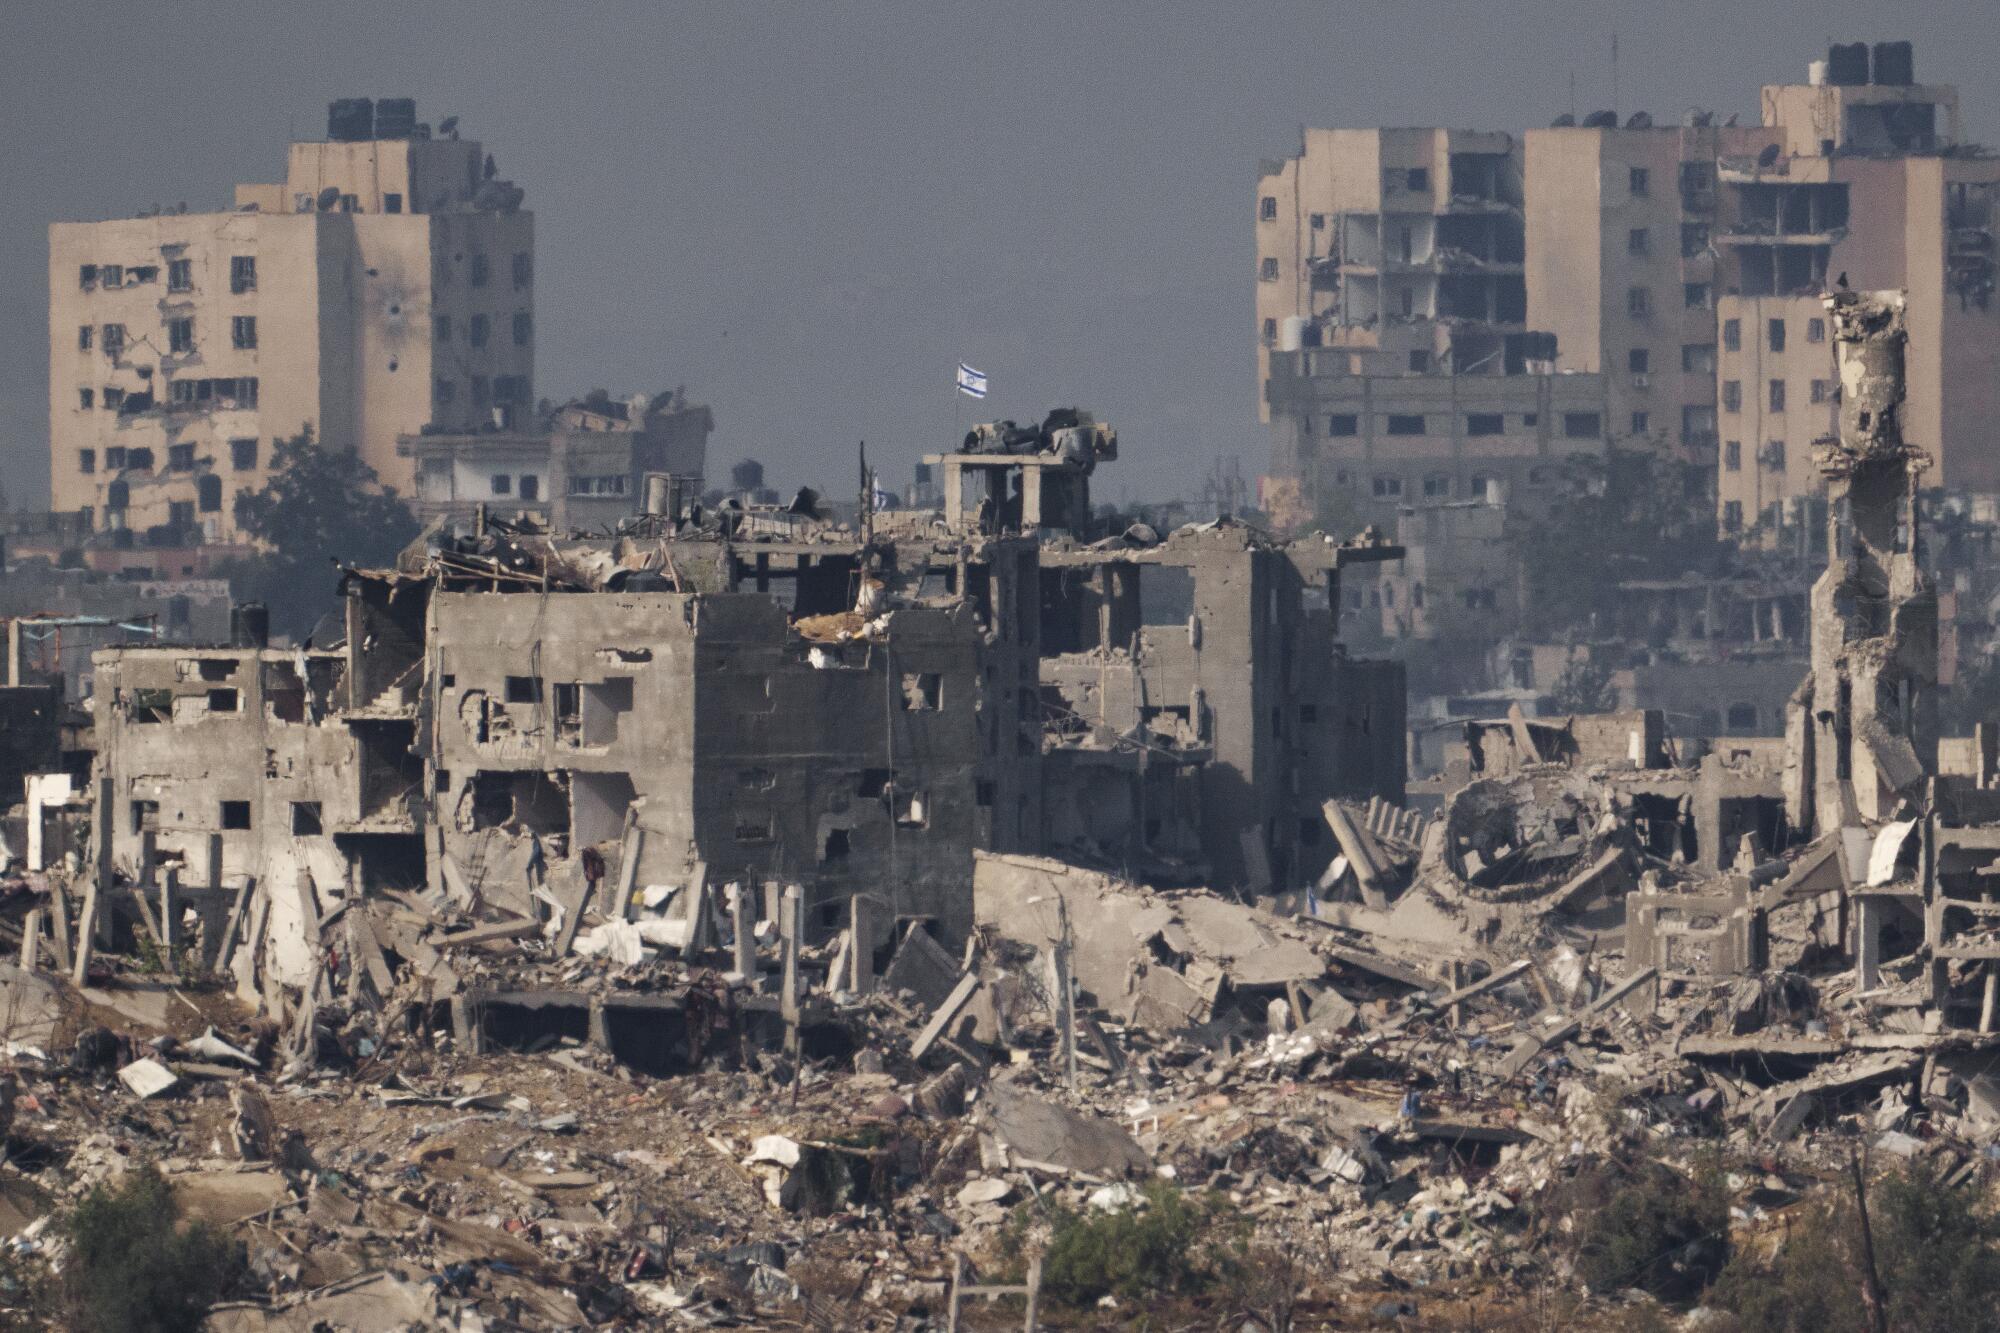 A flag flying in the distance atop a destroyed building surrounded by the ruins of other buildings 